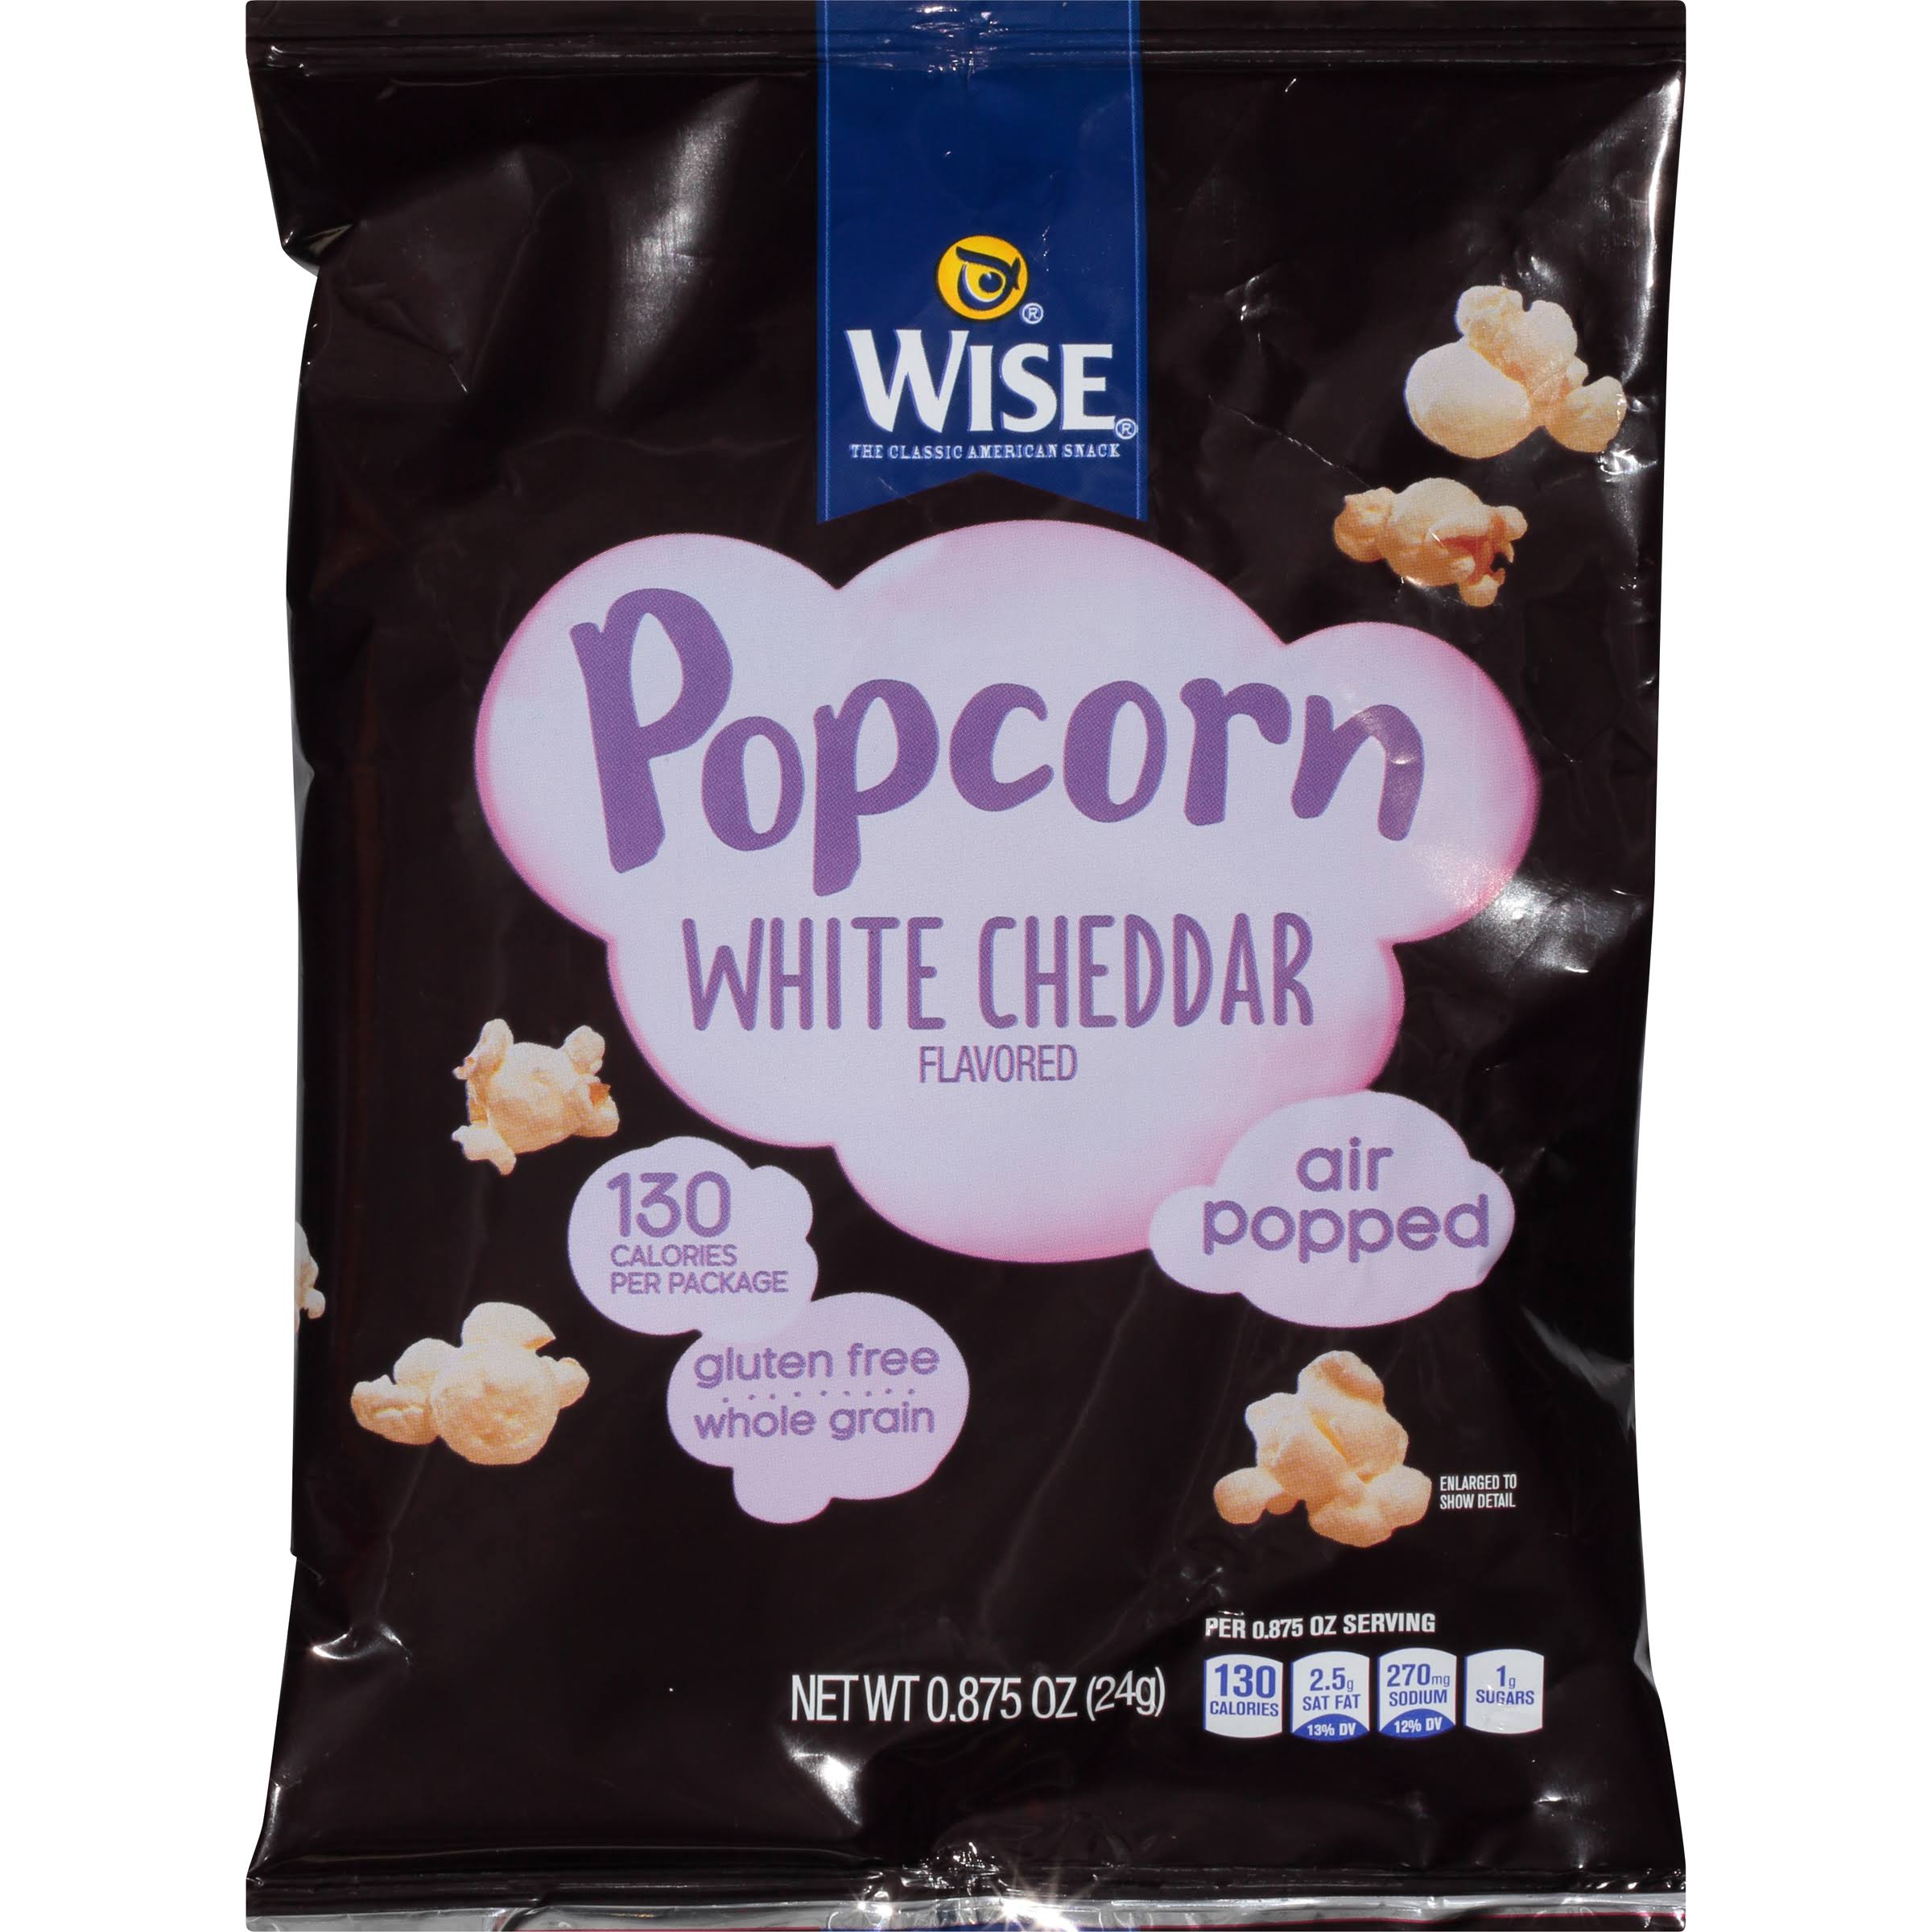 Wise White Cheddar Flavored Air Popped Popcorn